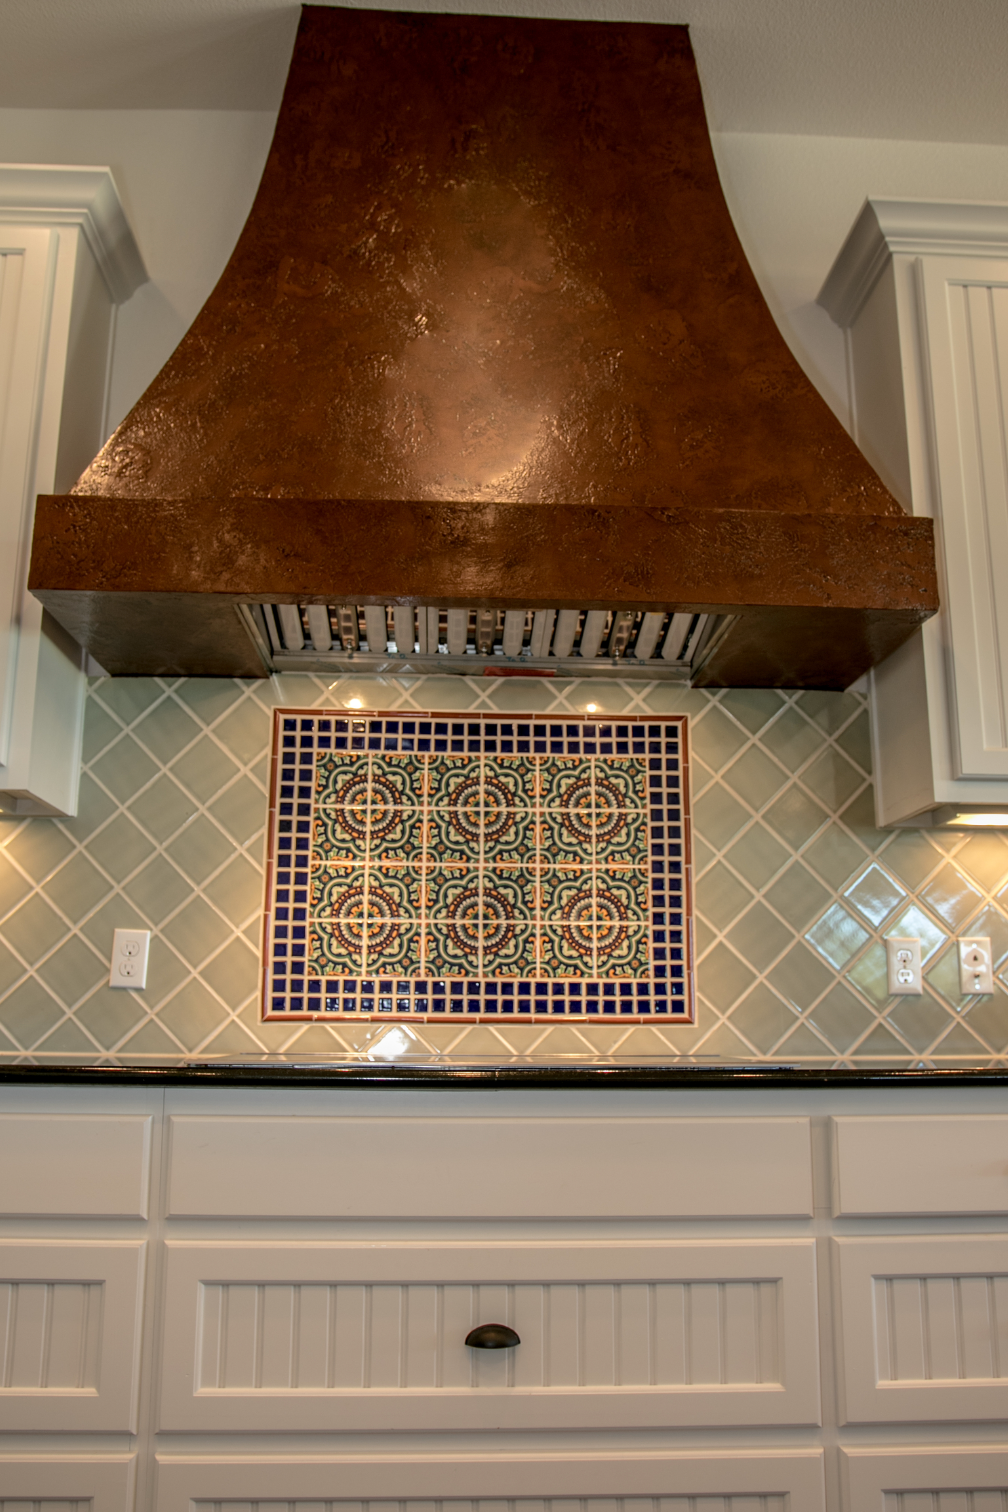 A kitchen with a copper hood and a mosaic on the wall.